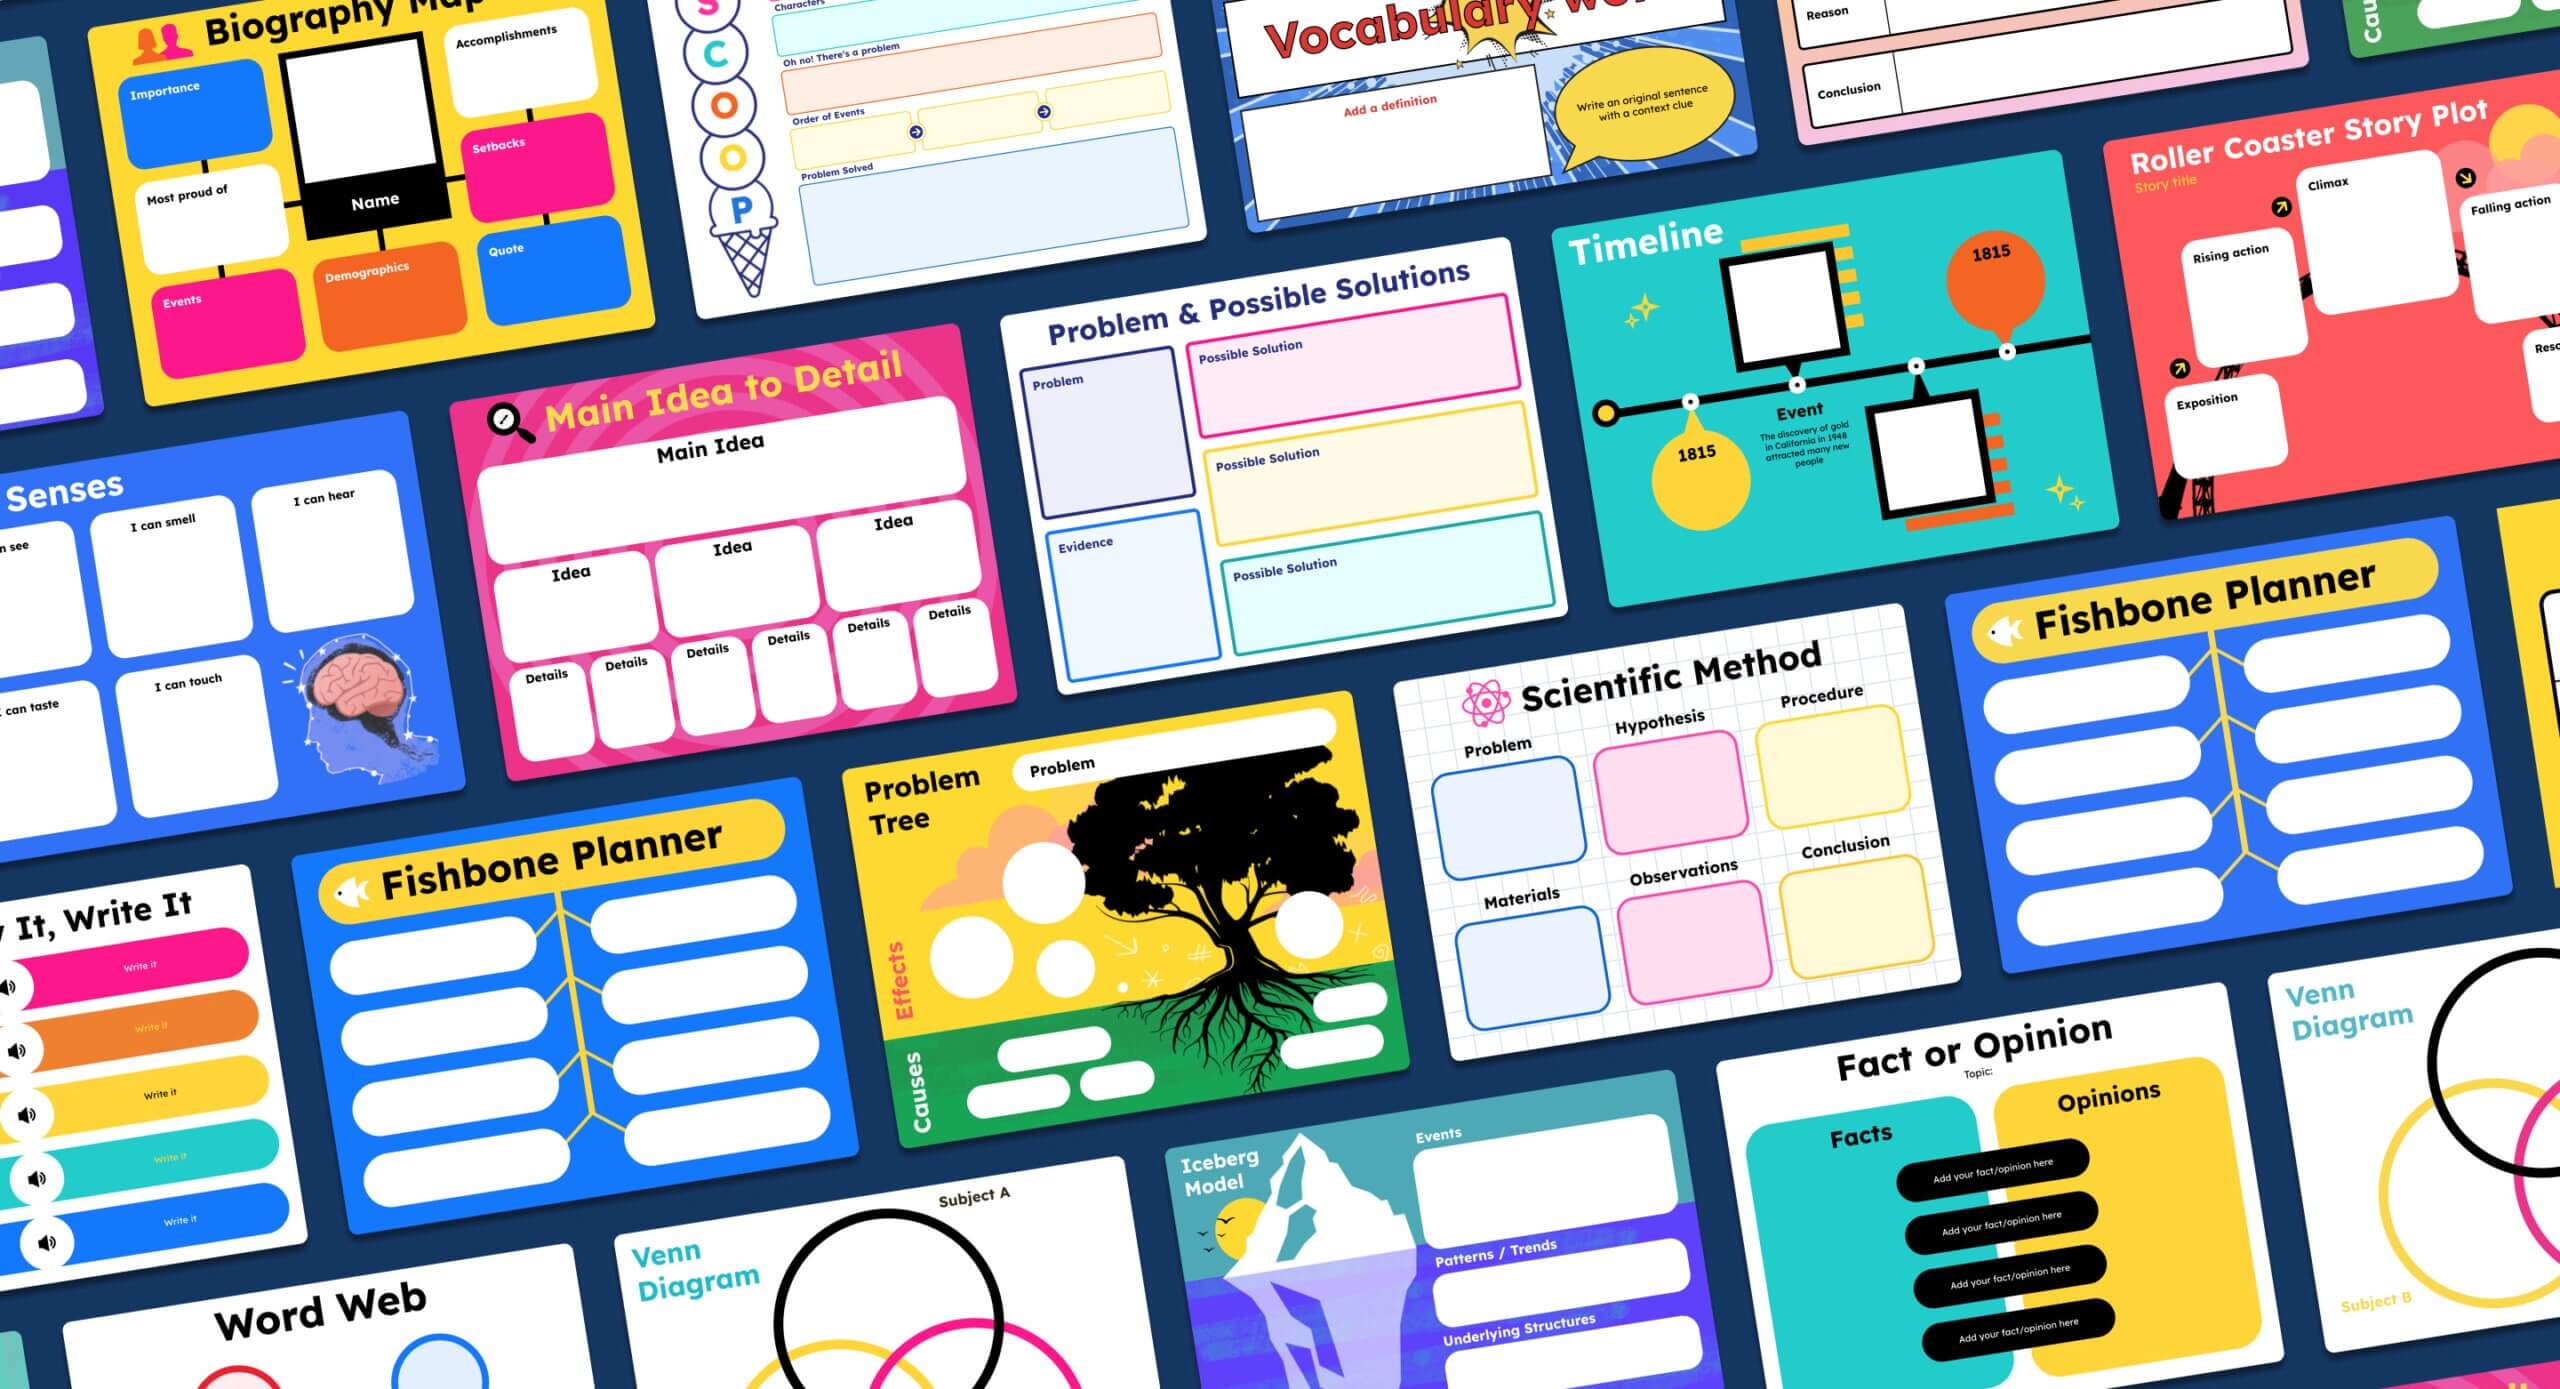 Featured Image for “Book Creator transforms Graphic Organizers with multimedia and accessibility”